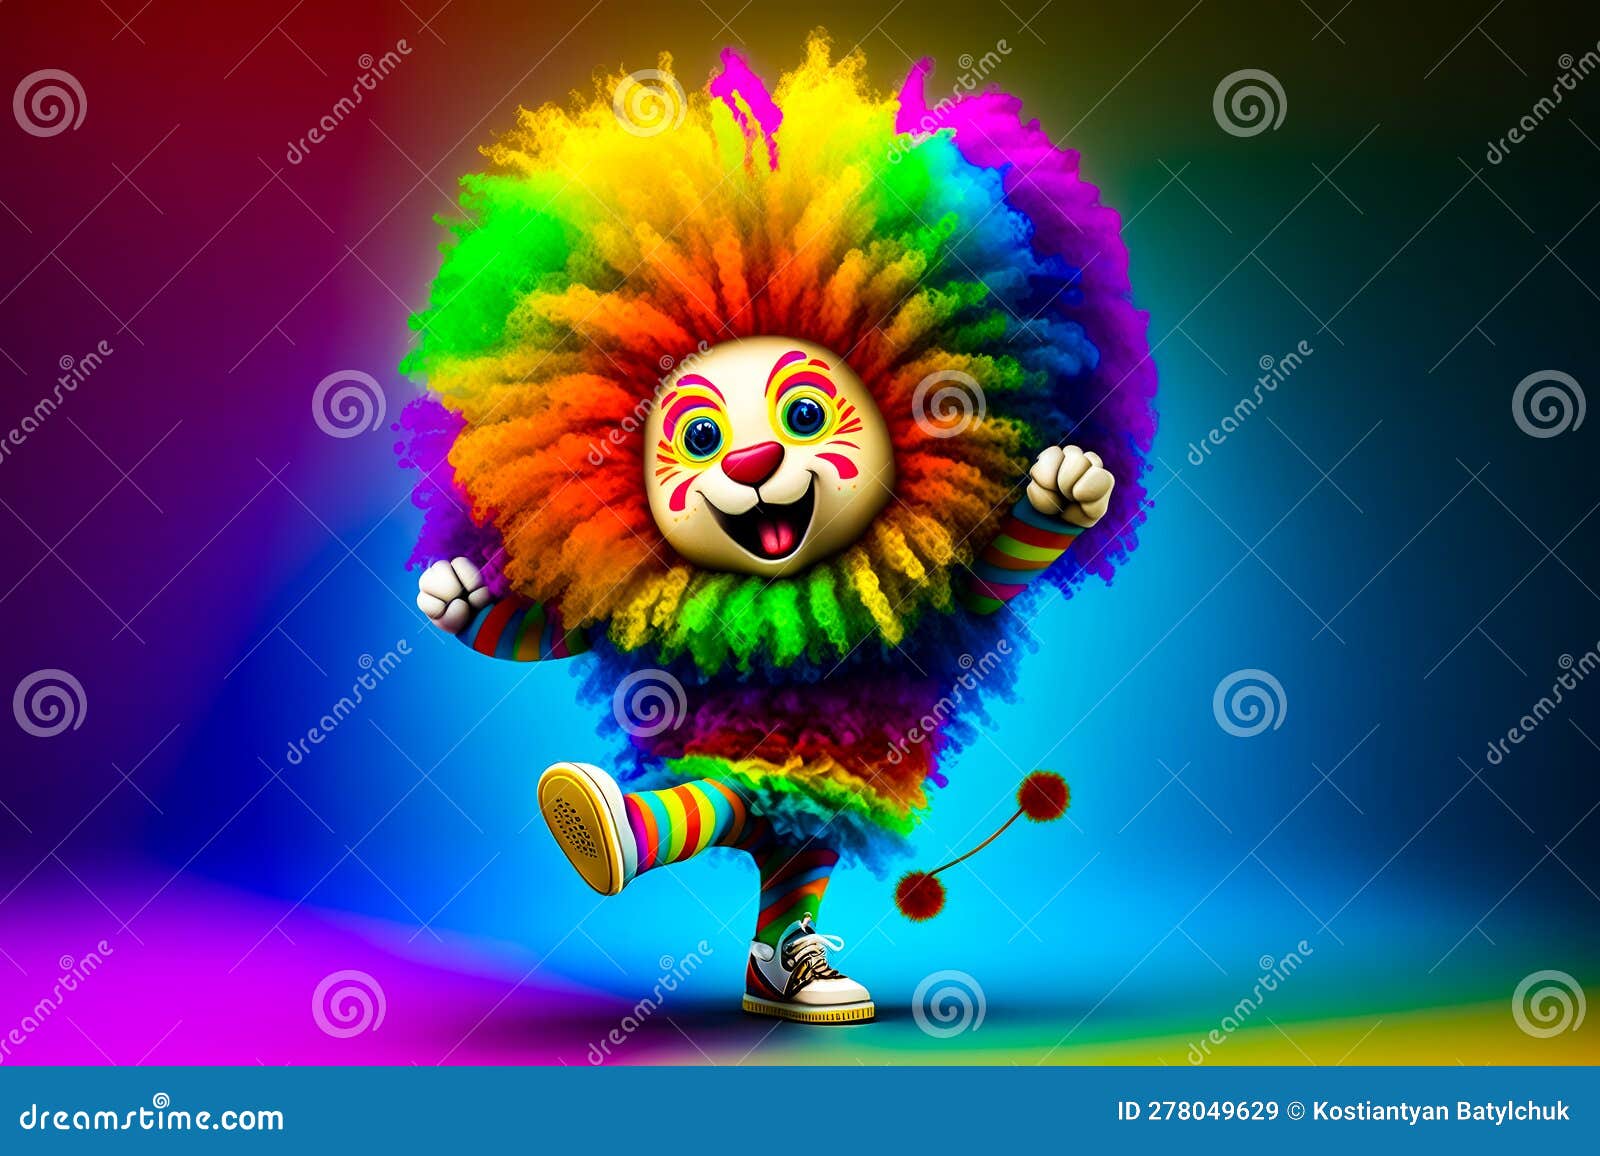 Colorful clown with blue hair and polka dot outfit - wide 3